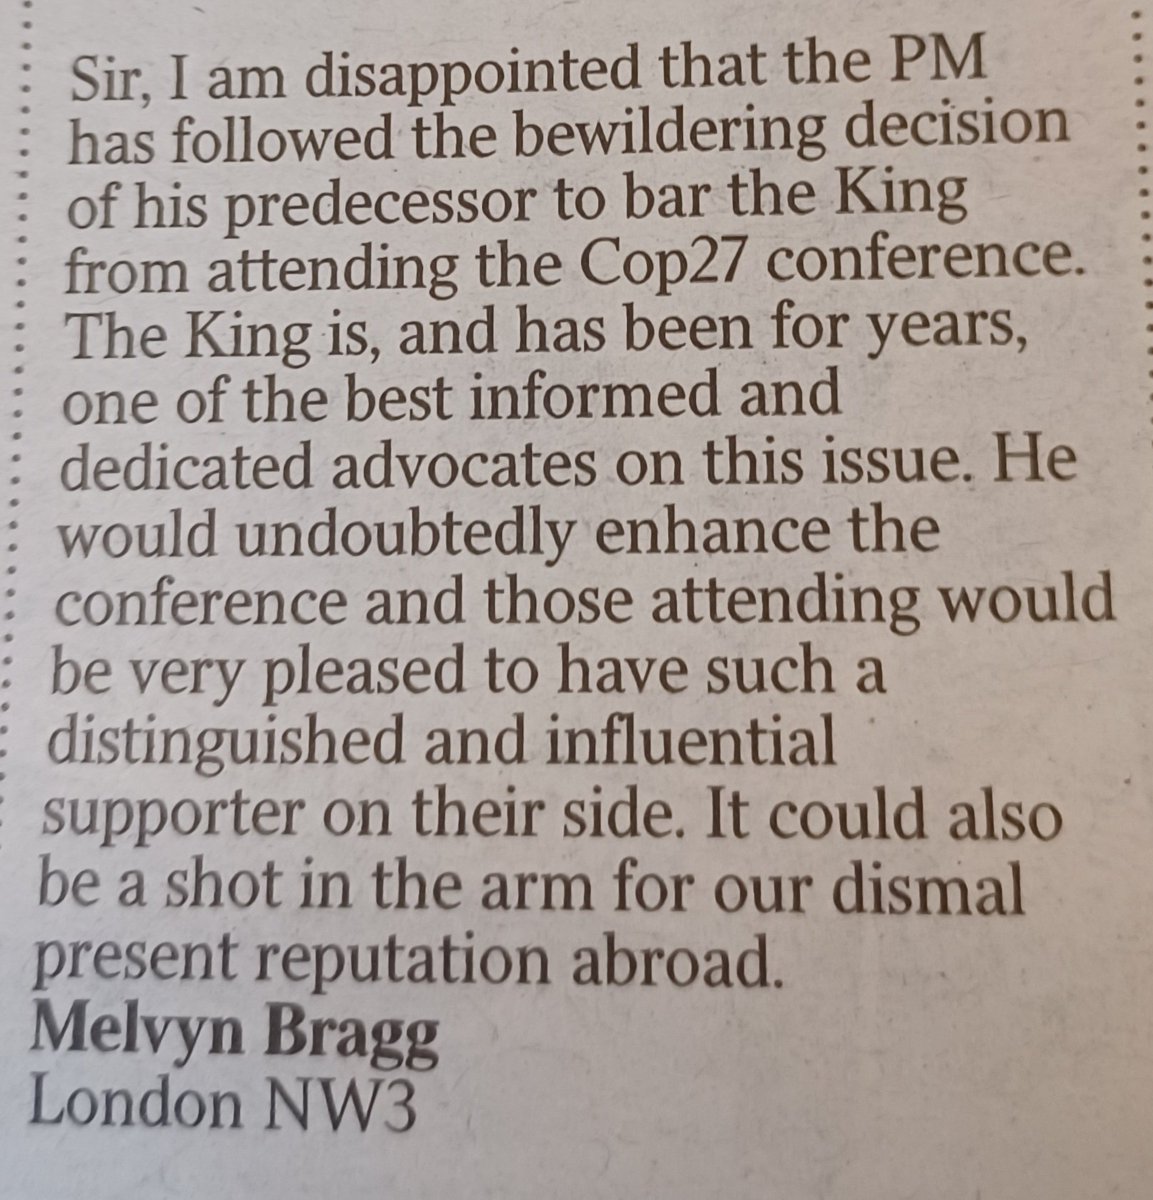 Letter in today's Times